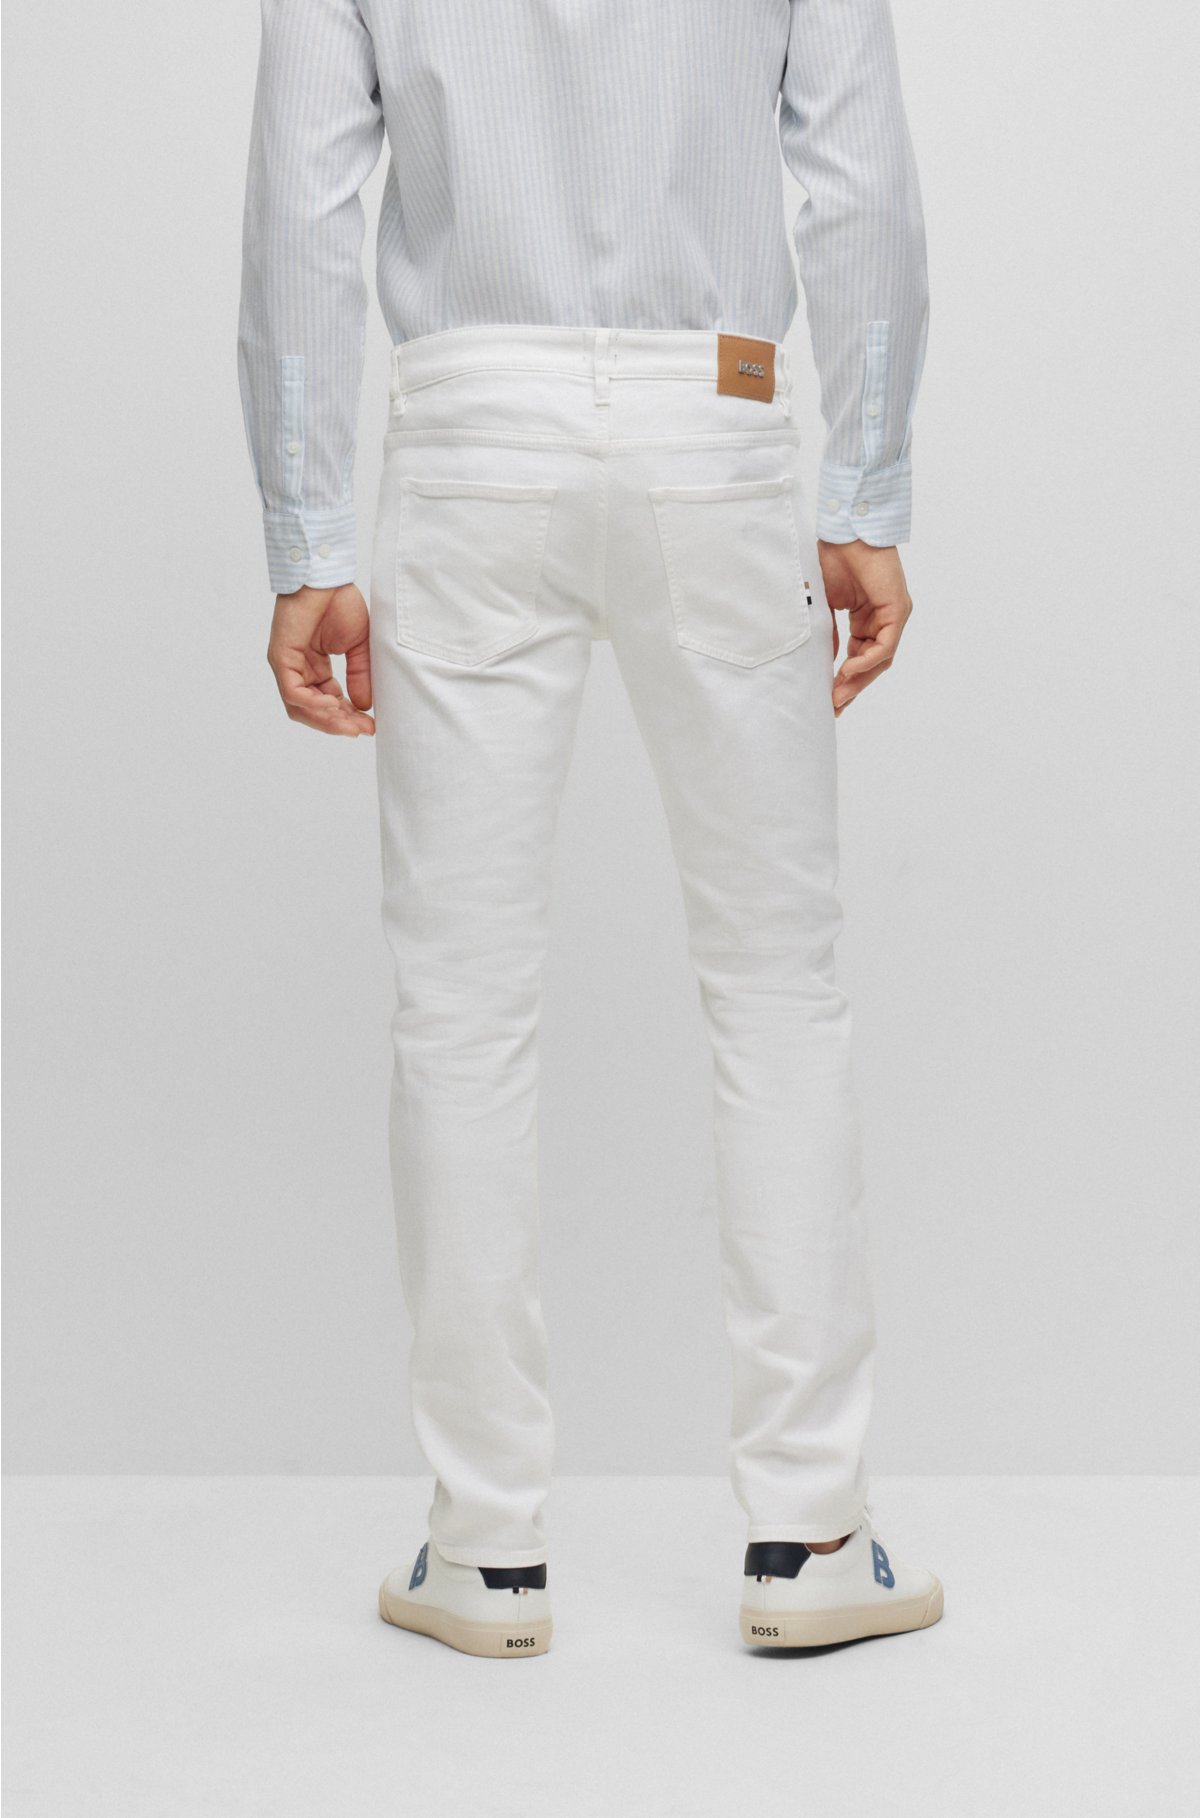 BOSS - Slim-fit jeans in cashmere-touch denim